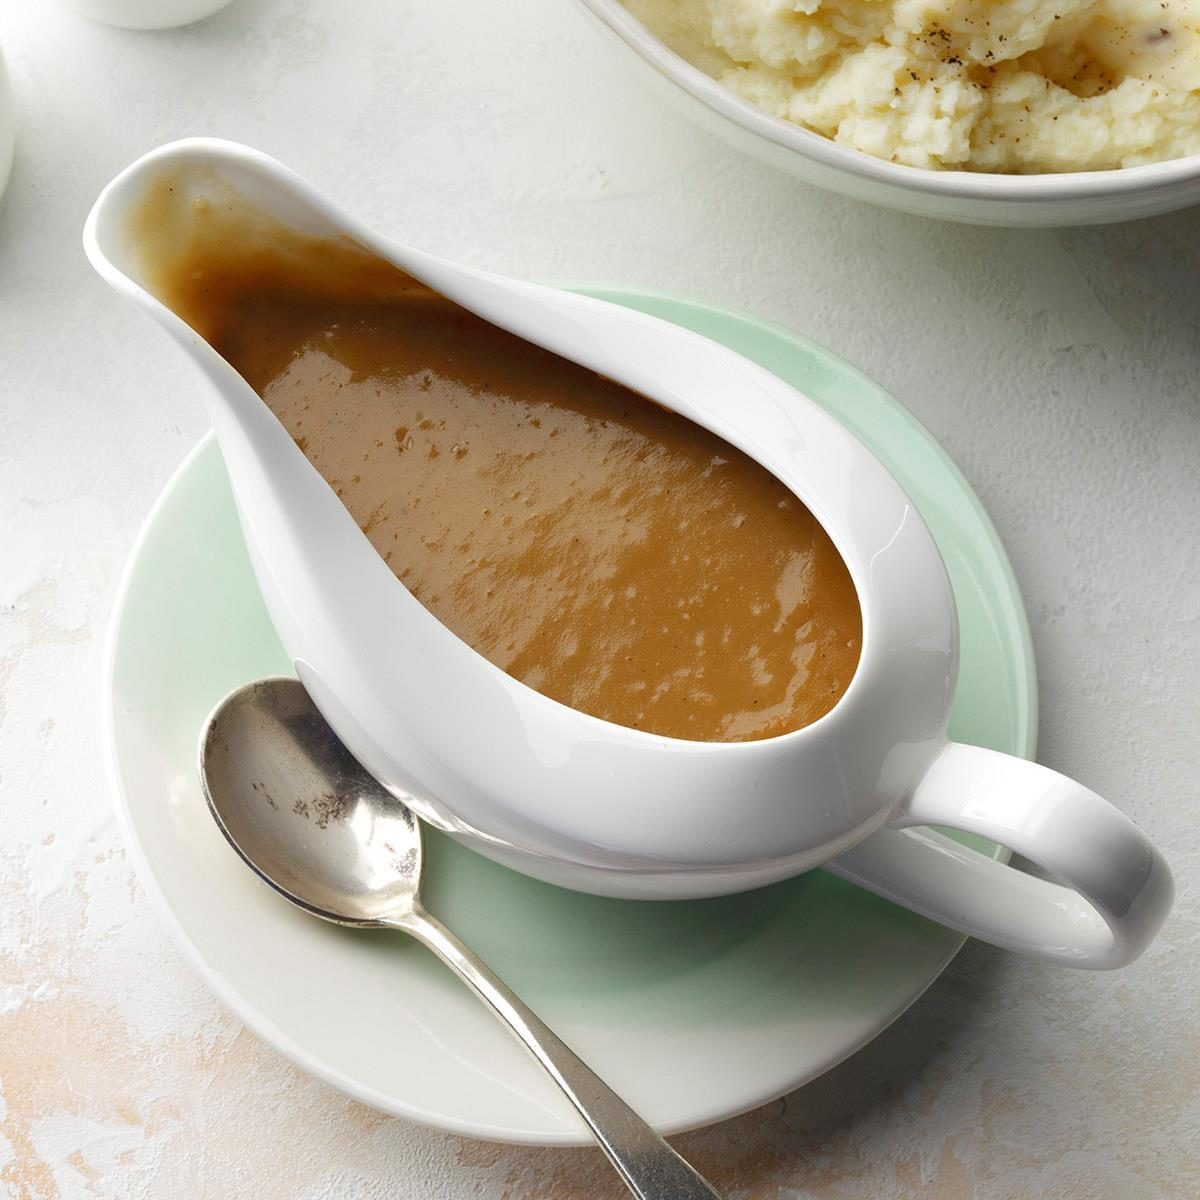 How To Cook A Turkey And Gravy In Just 2 Hours! - Foolproof!